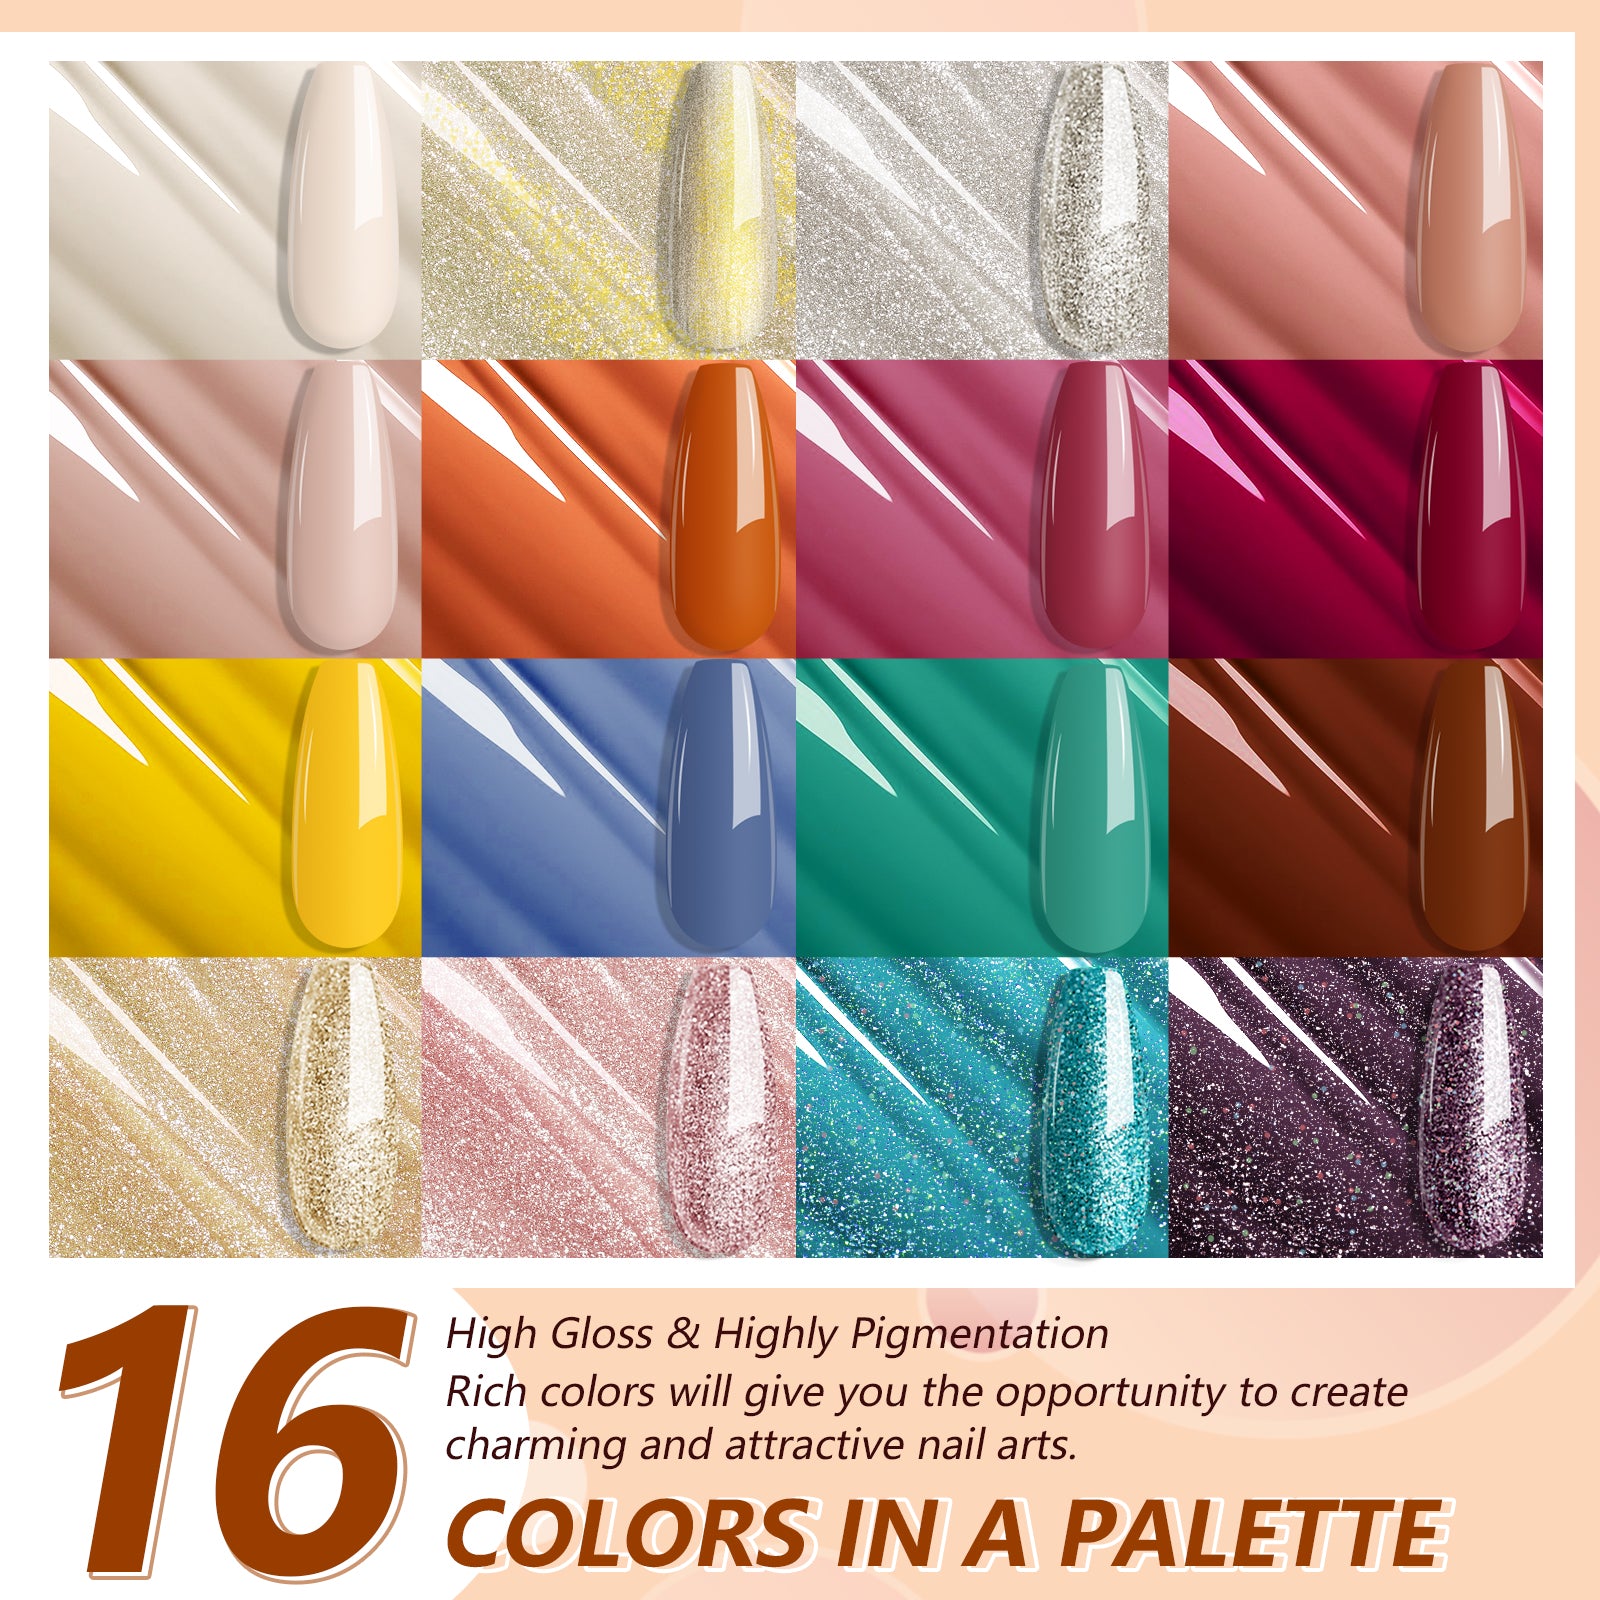 [US ONLY]Solid Cream Gel Nail Polish Kit - 16 Colors